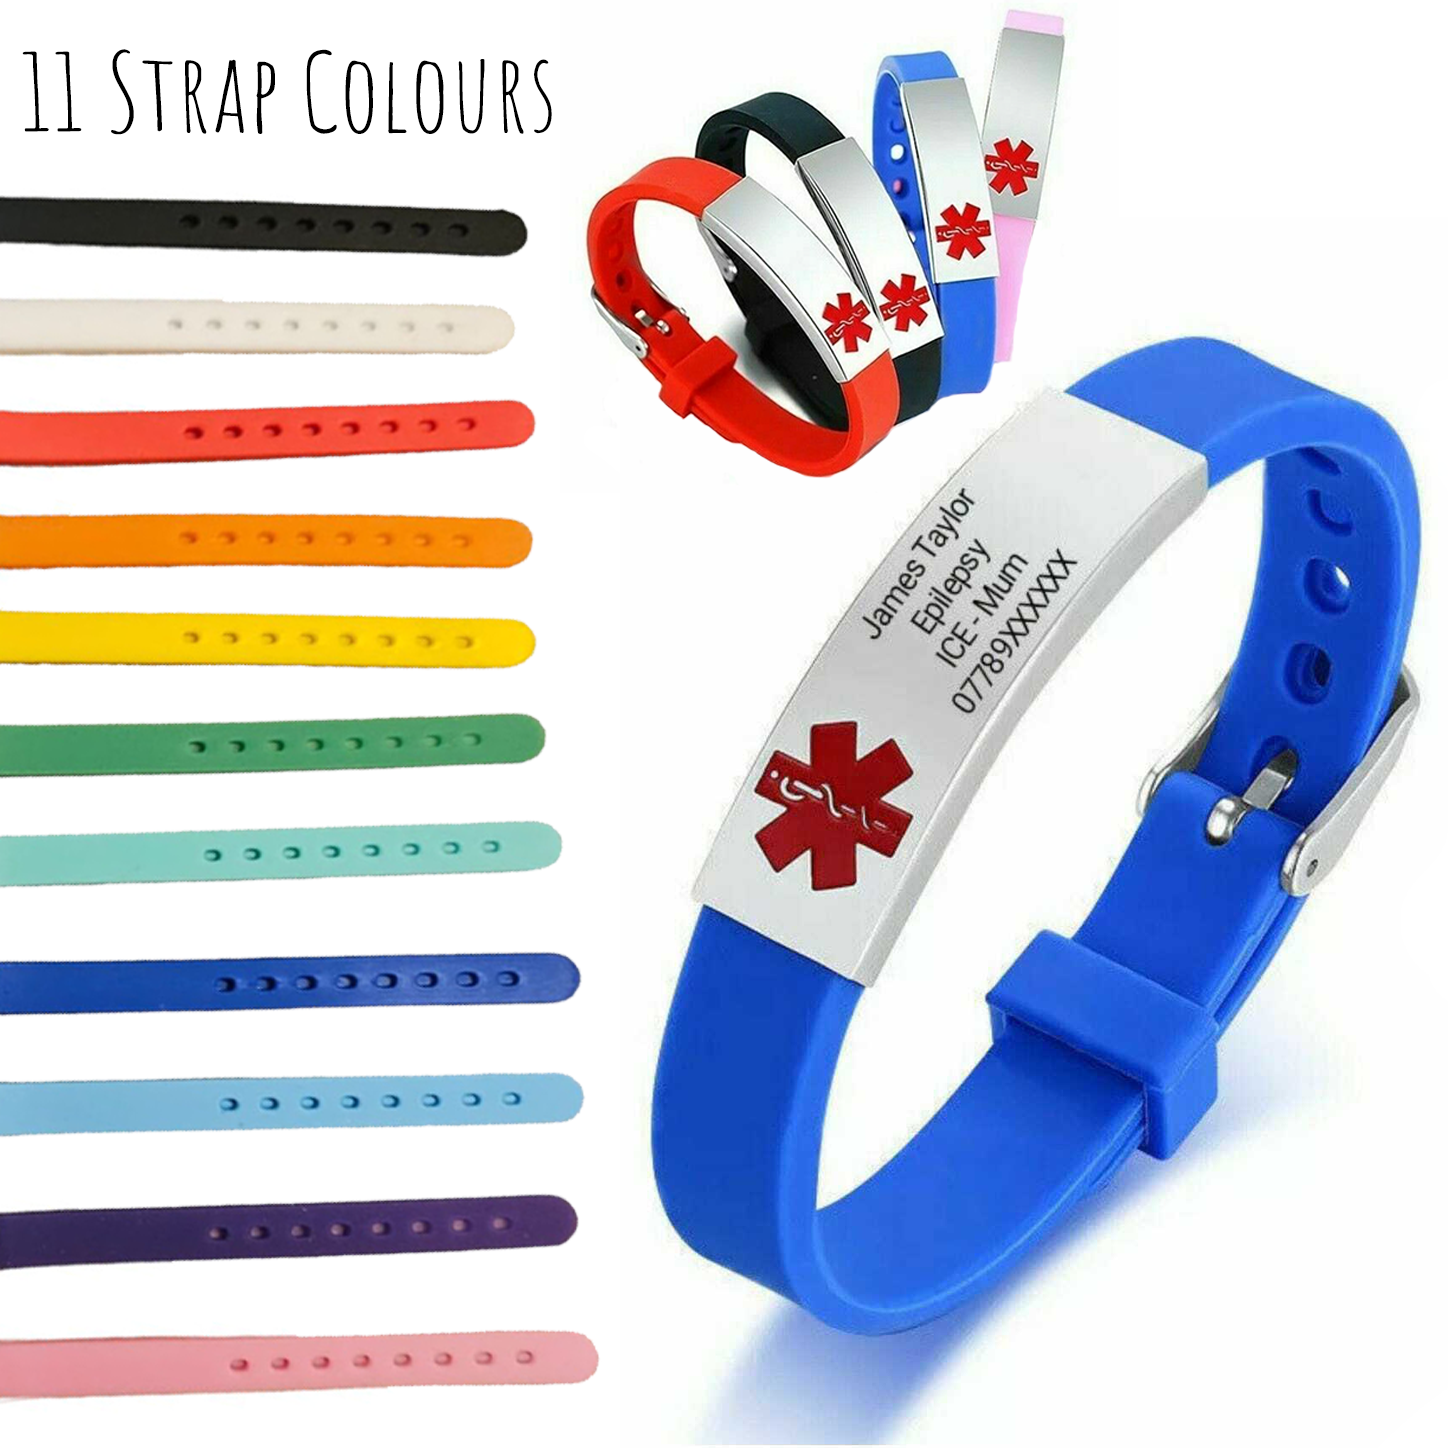 Candy Color Luminous Bracelet Silicone Glow in the Dark Wristband Gift E0A4  - Walmart.com